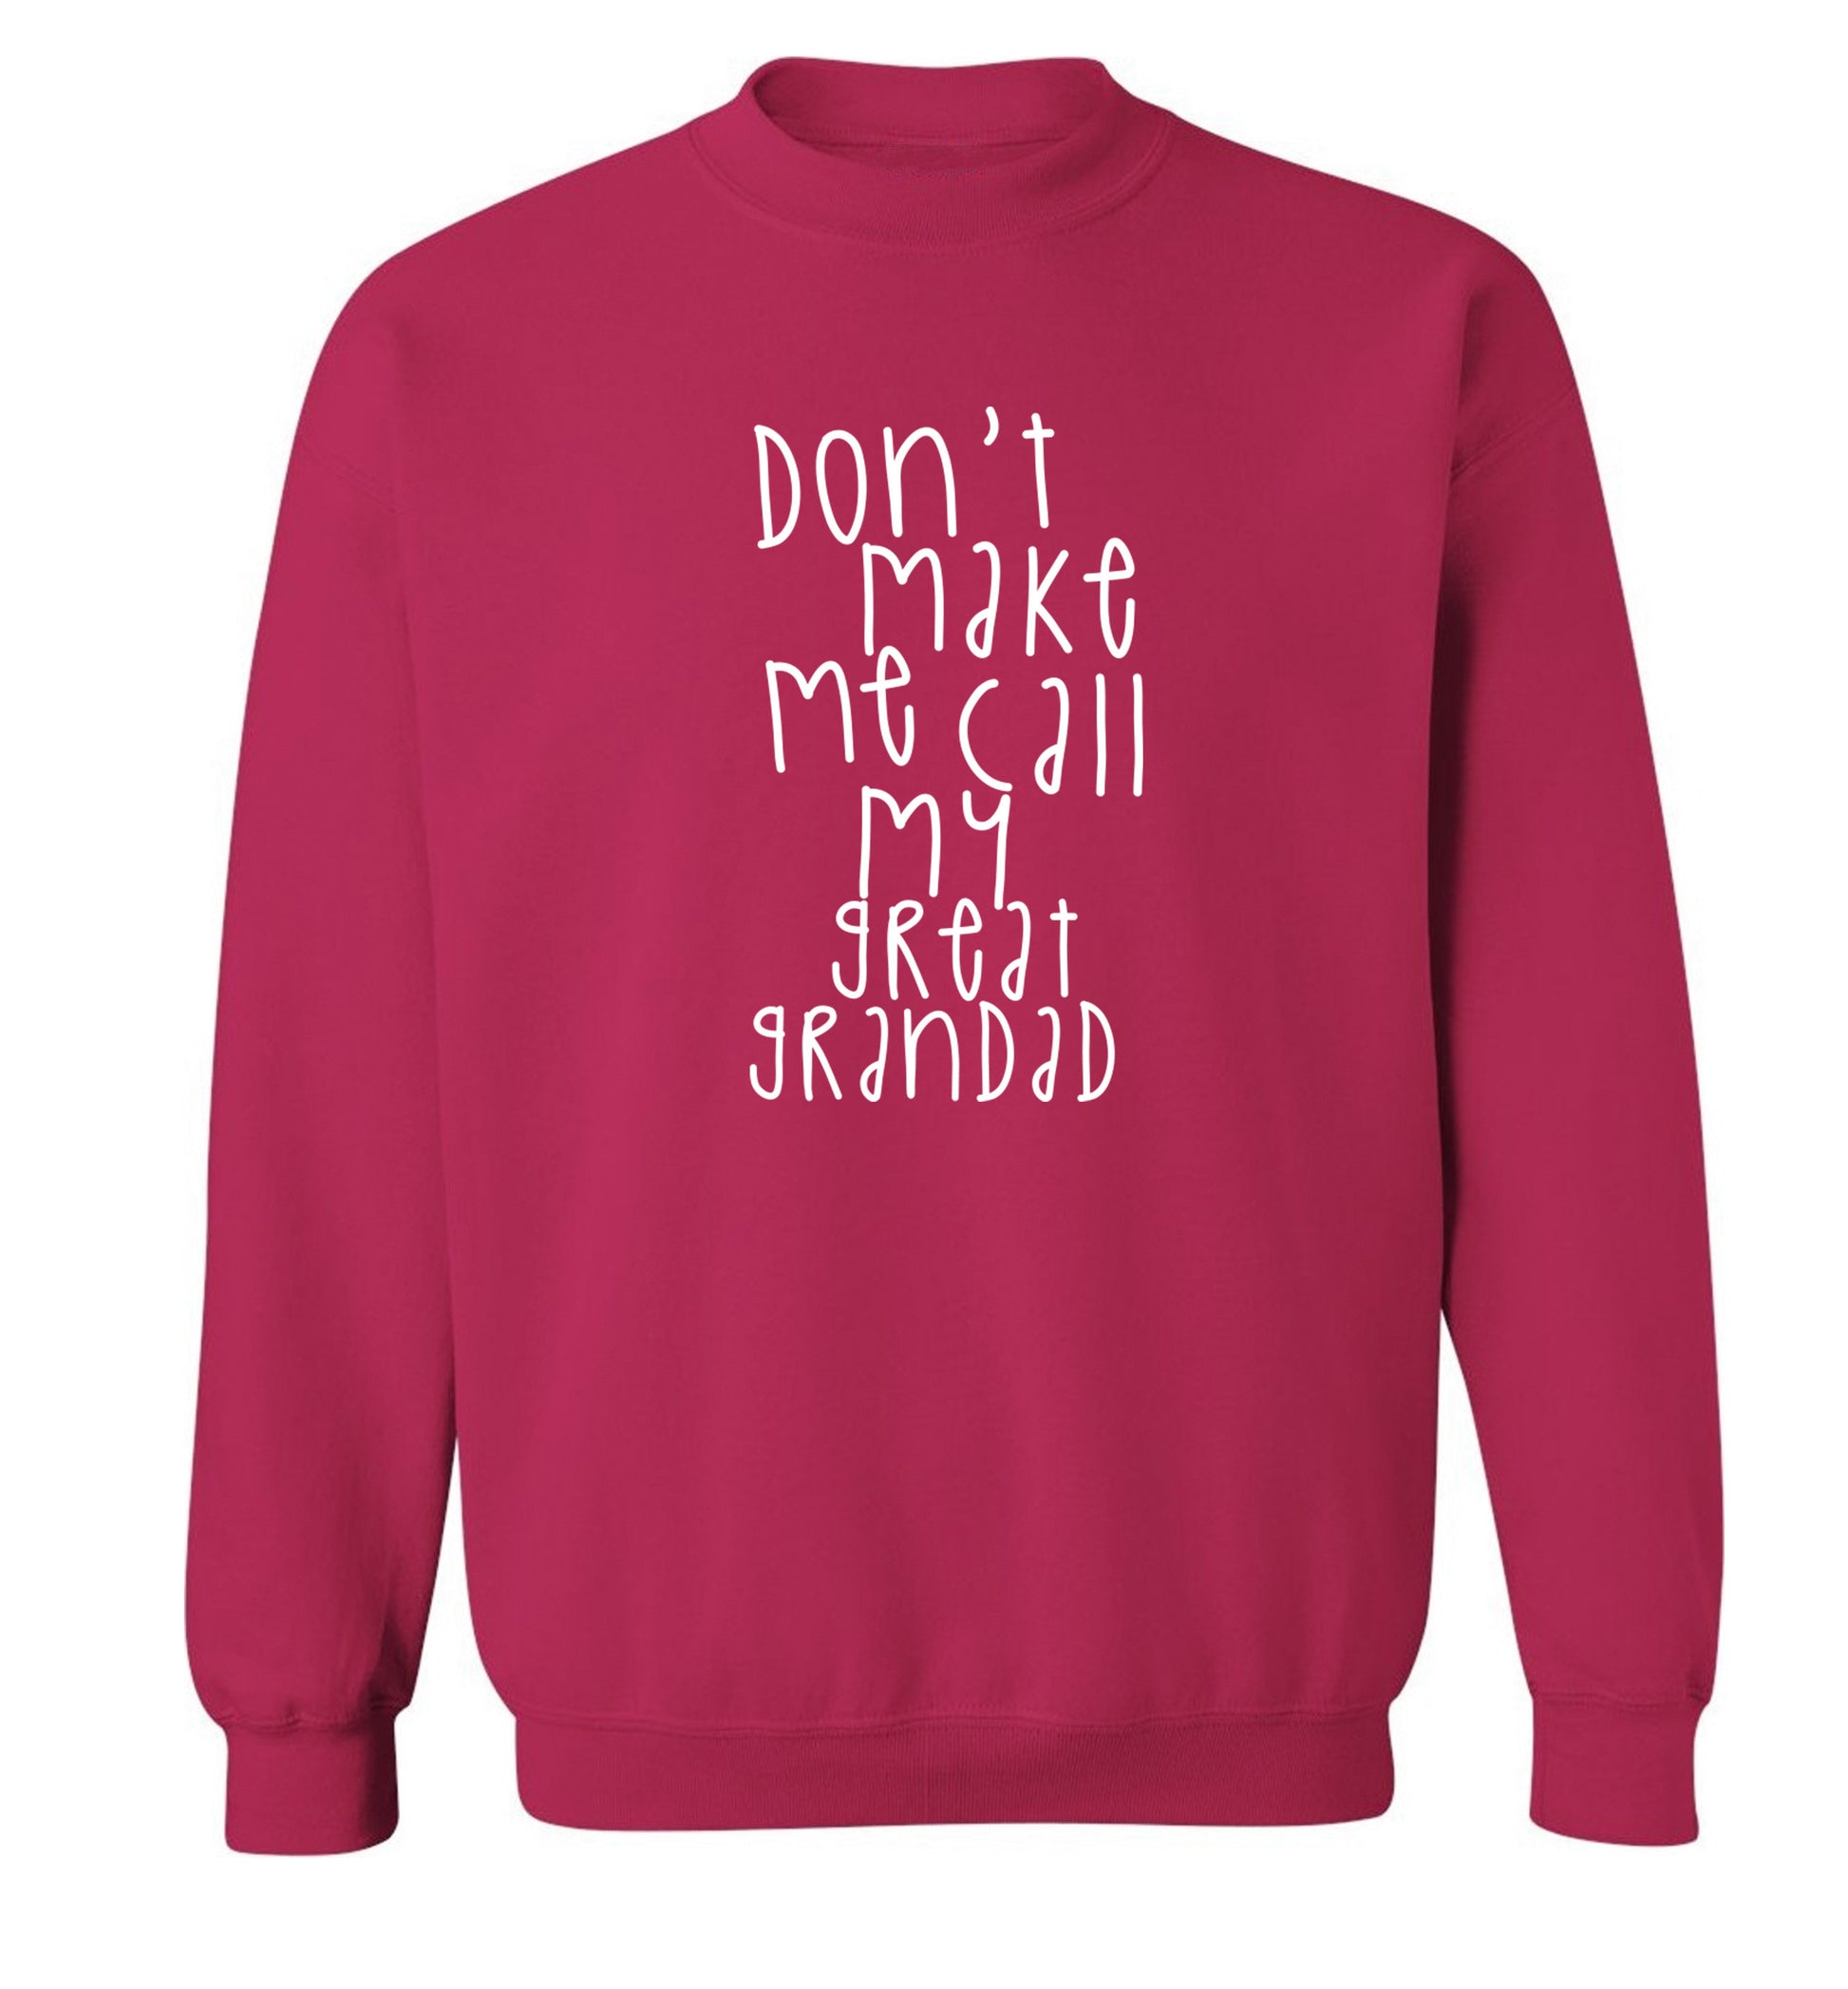 Don't make me call my great grandad Adult's unisex pink Sweater 2XL